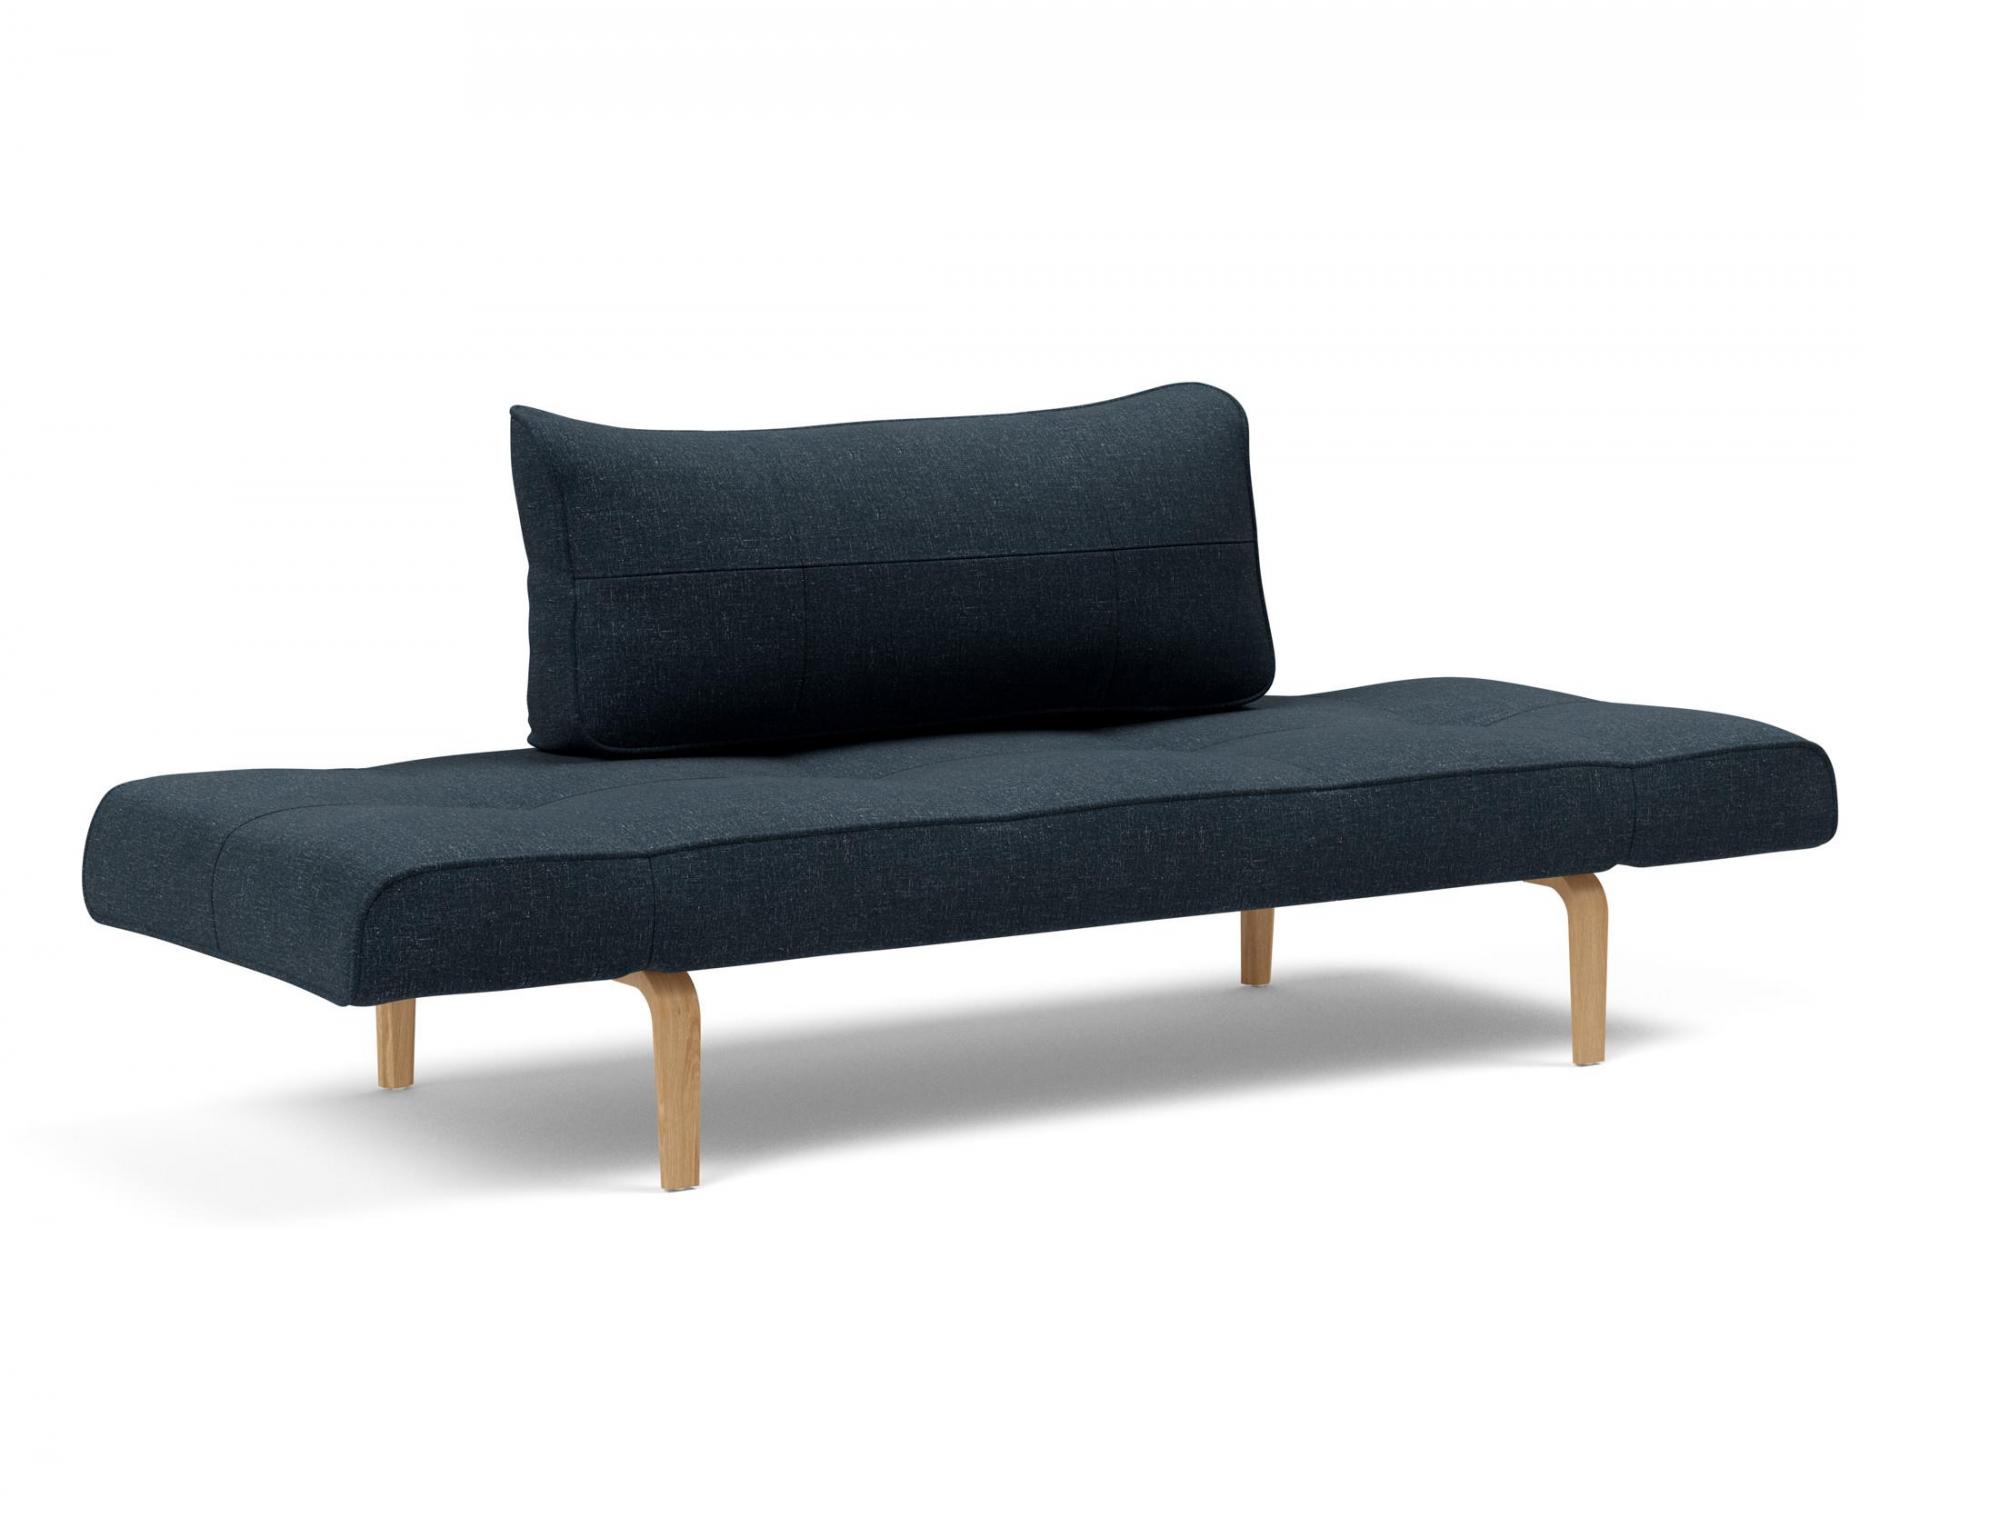 Liege/Daybed Liege/Daybed Zeal - Innovation Sofas